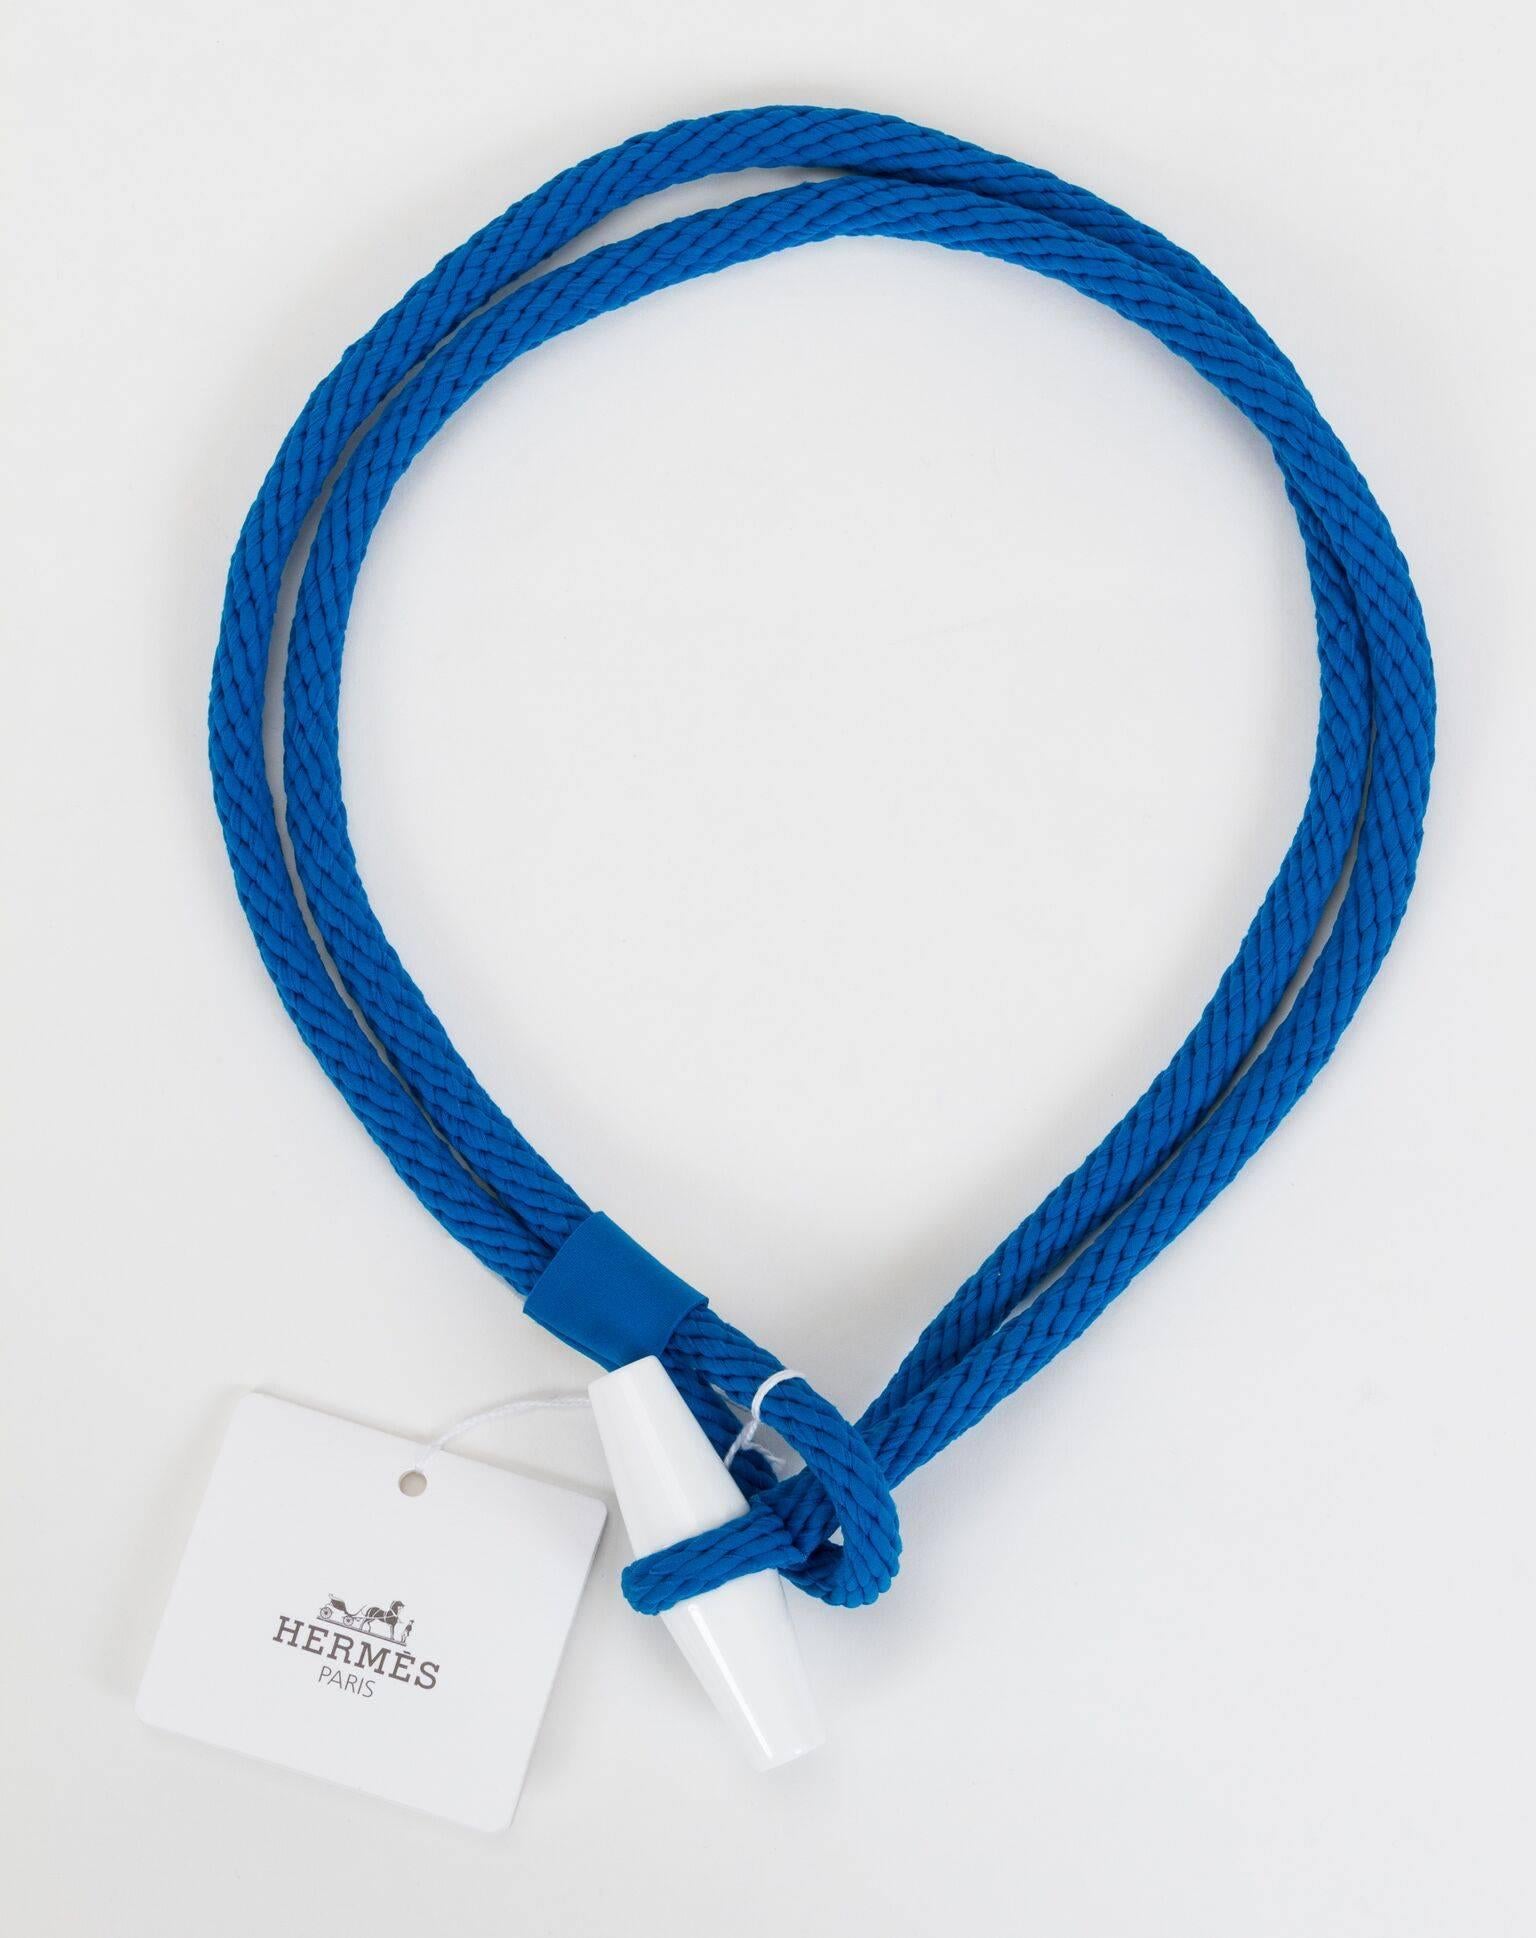 Hermès tricot belt, bleu outremer and white resin toggle. Brand new with tag. Size small.